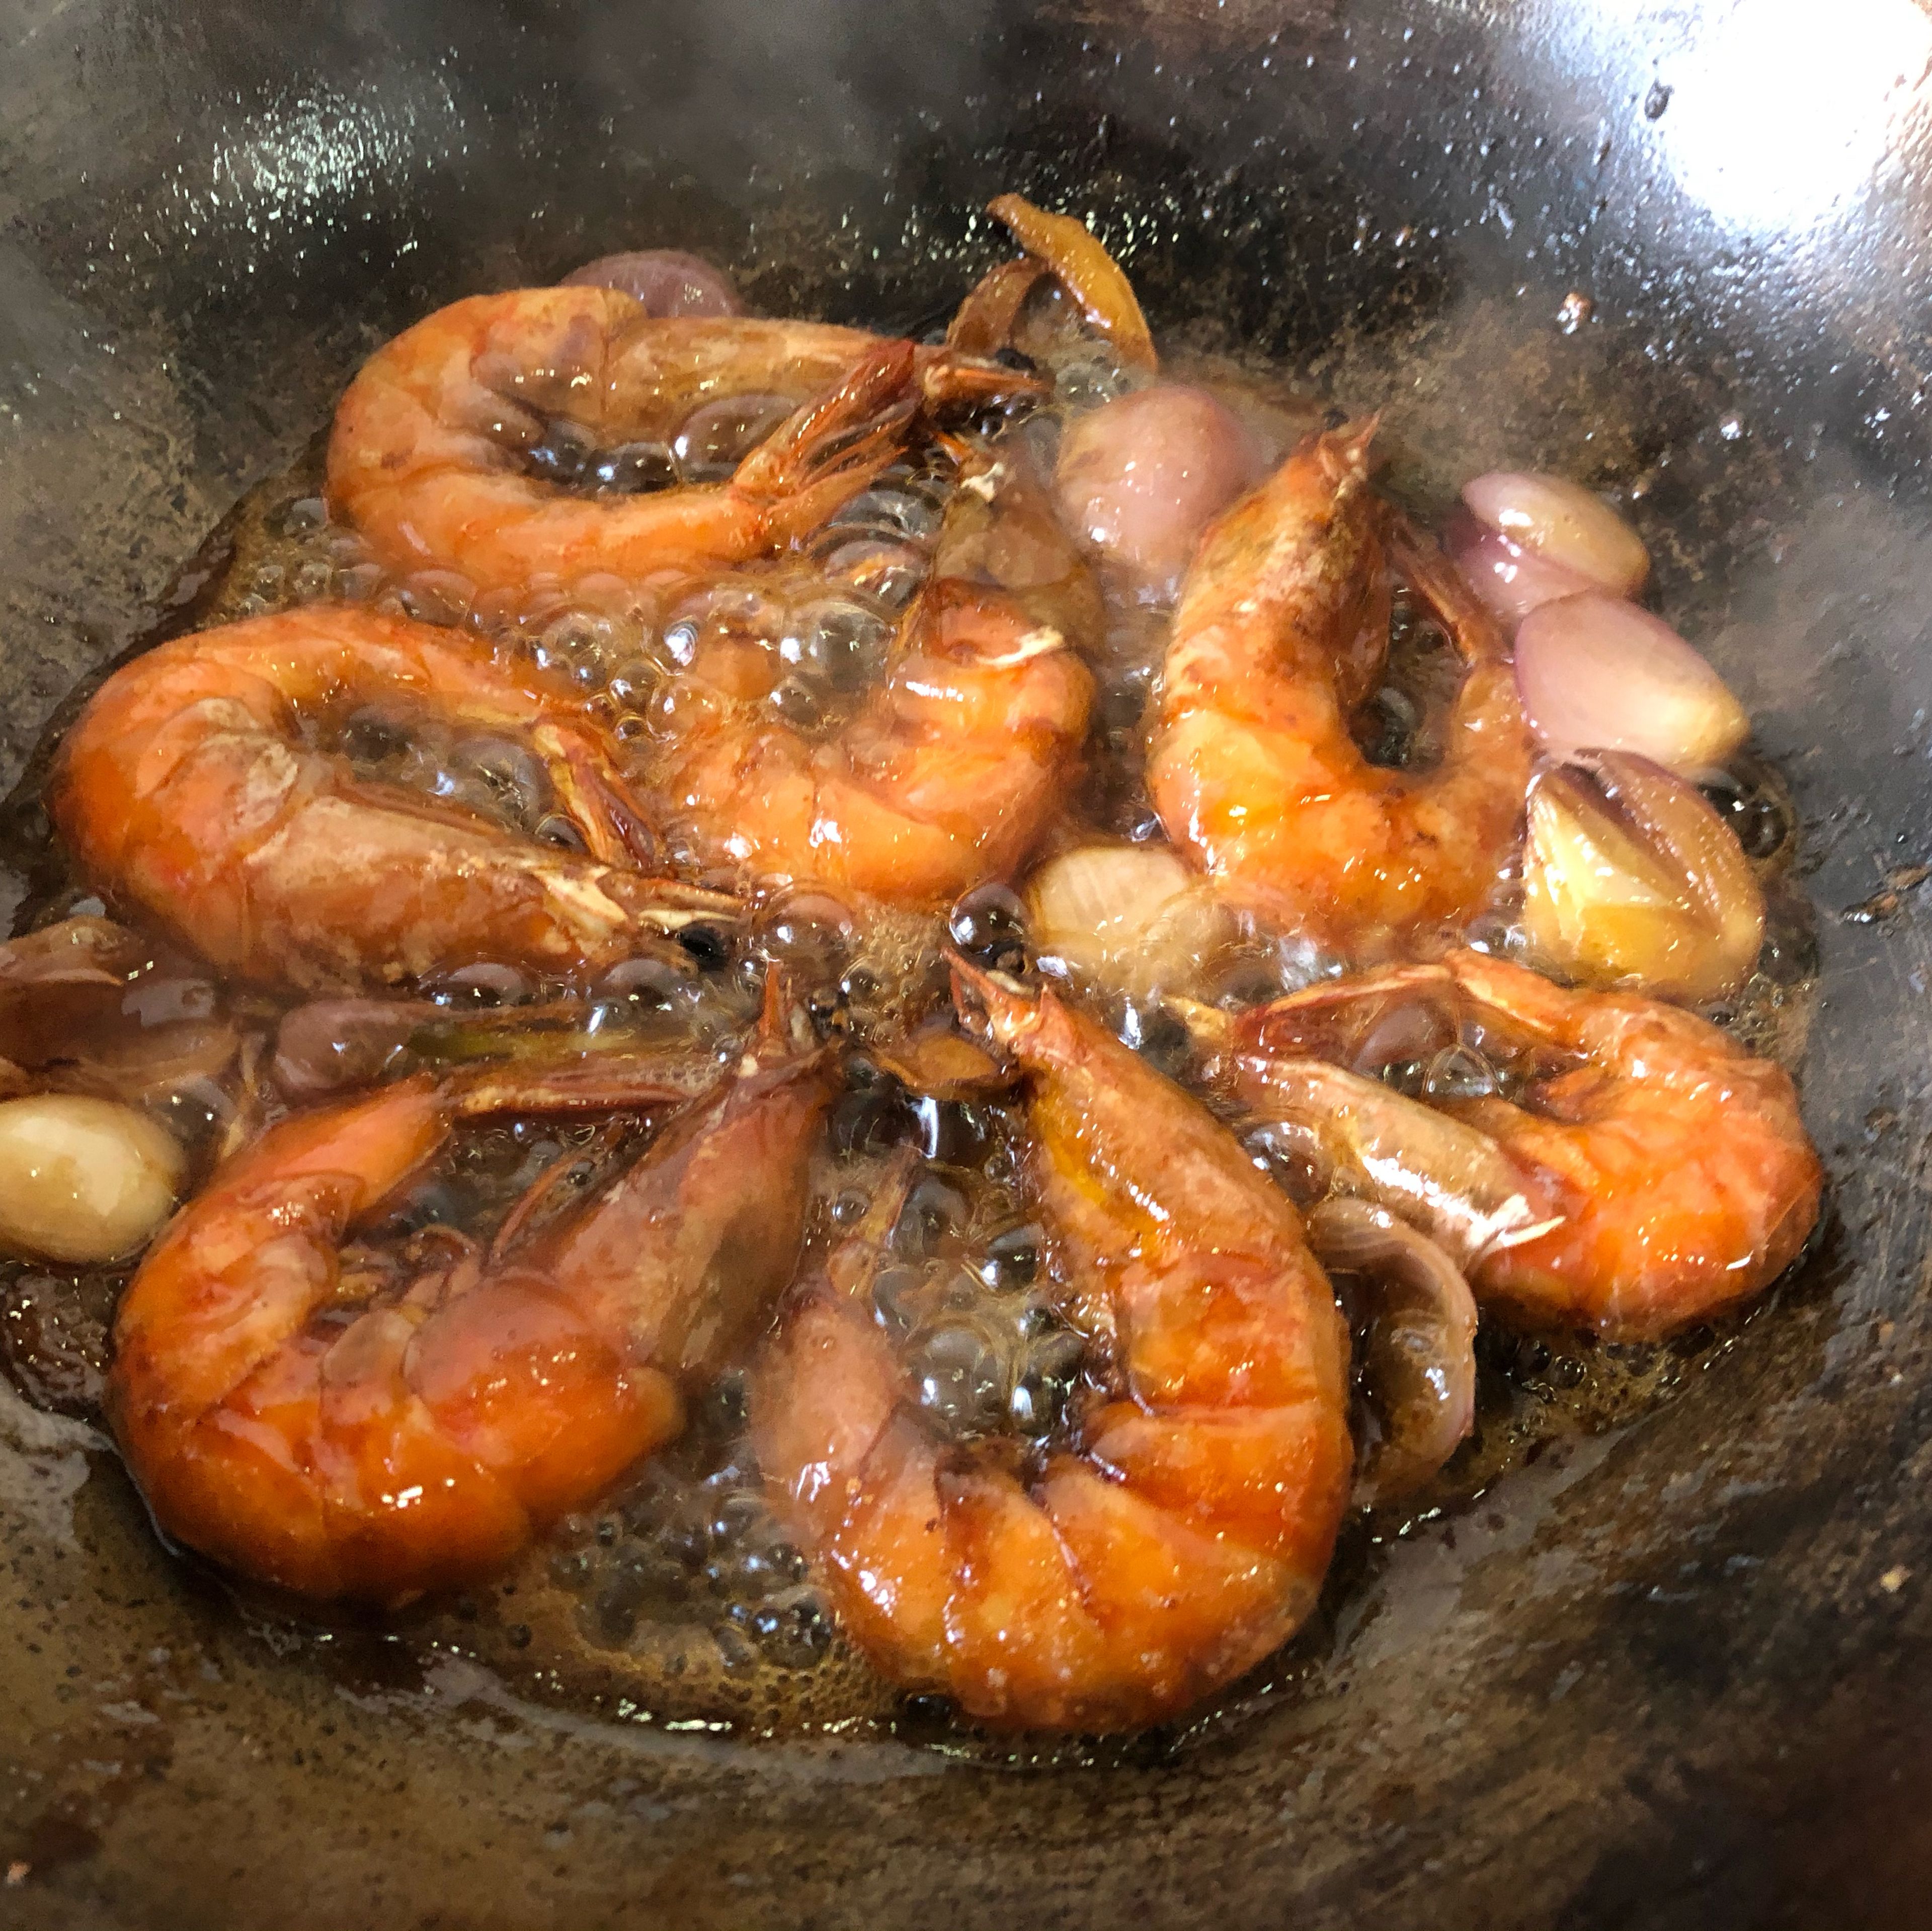 The prawns are now ready to be plated.